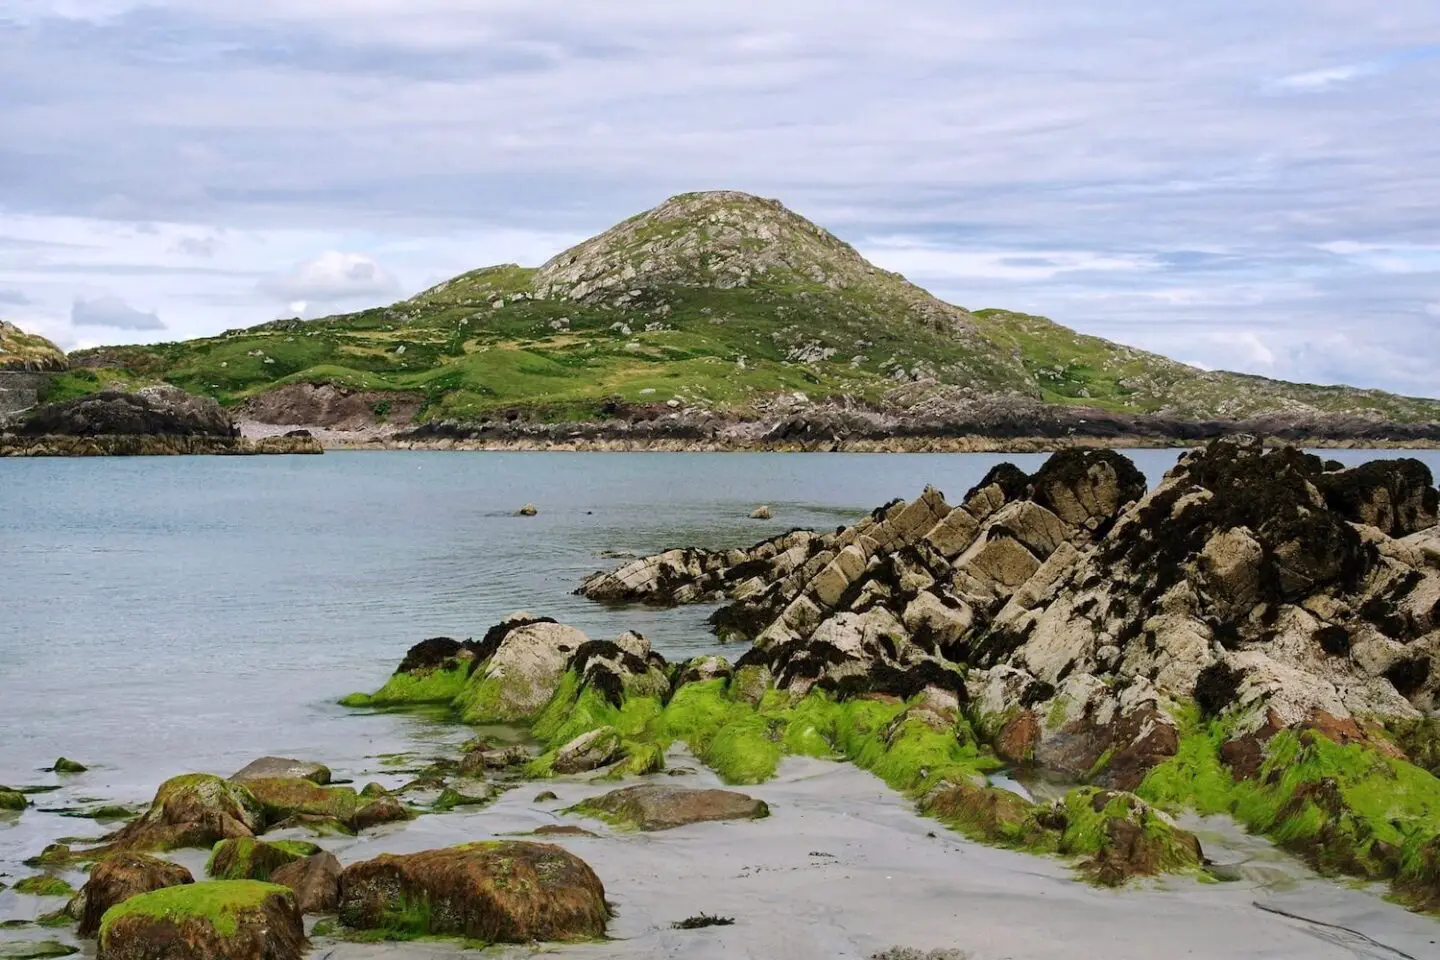 The coastline in Ireland. A hill and rocks surrounded by water